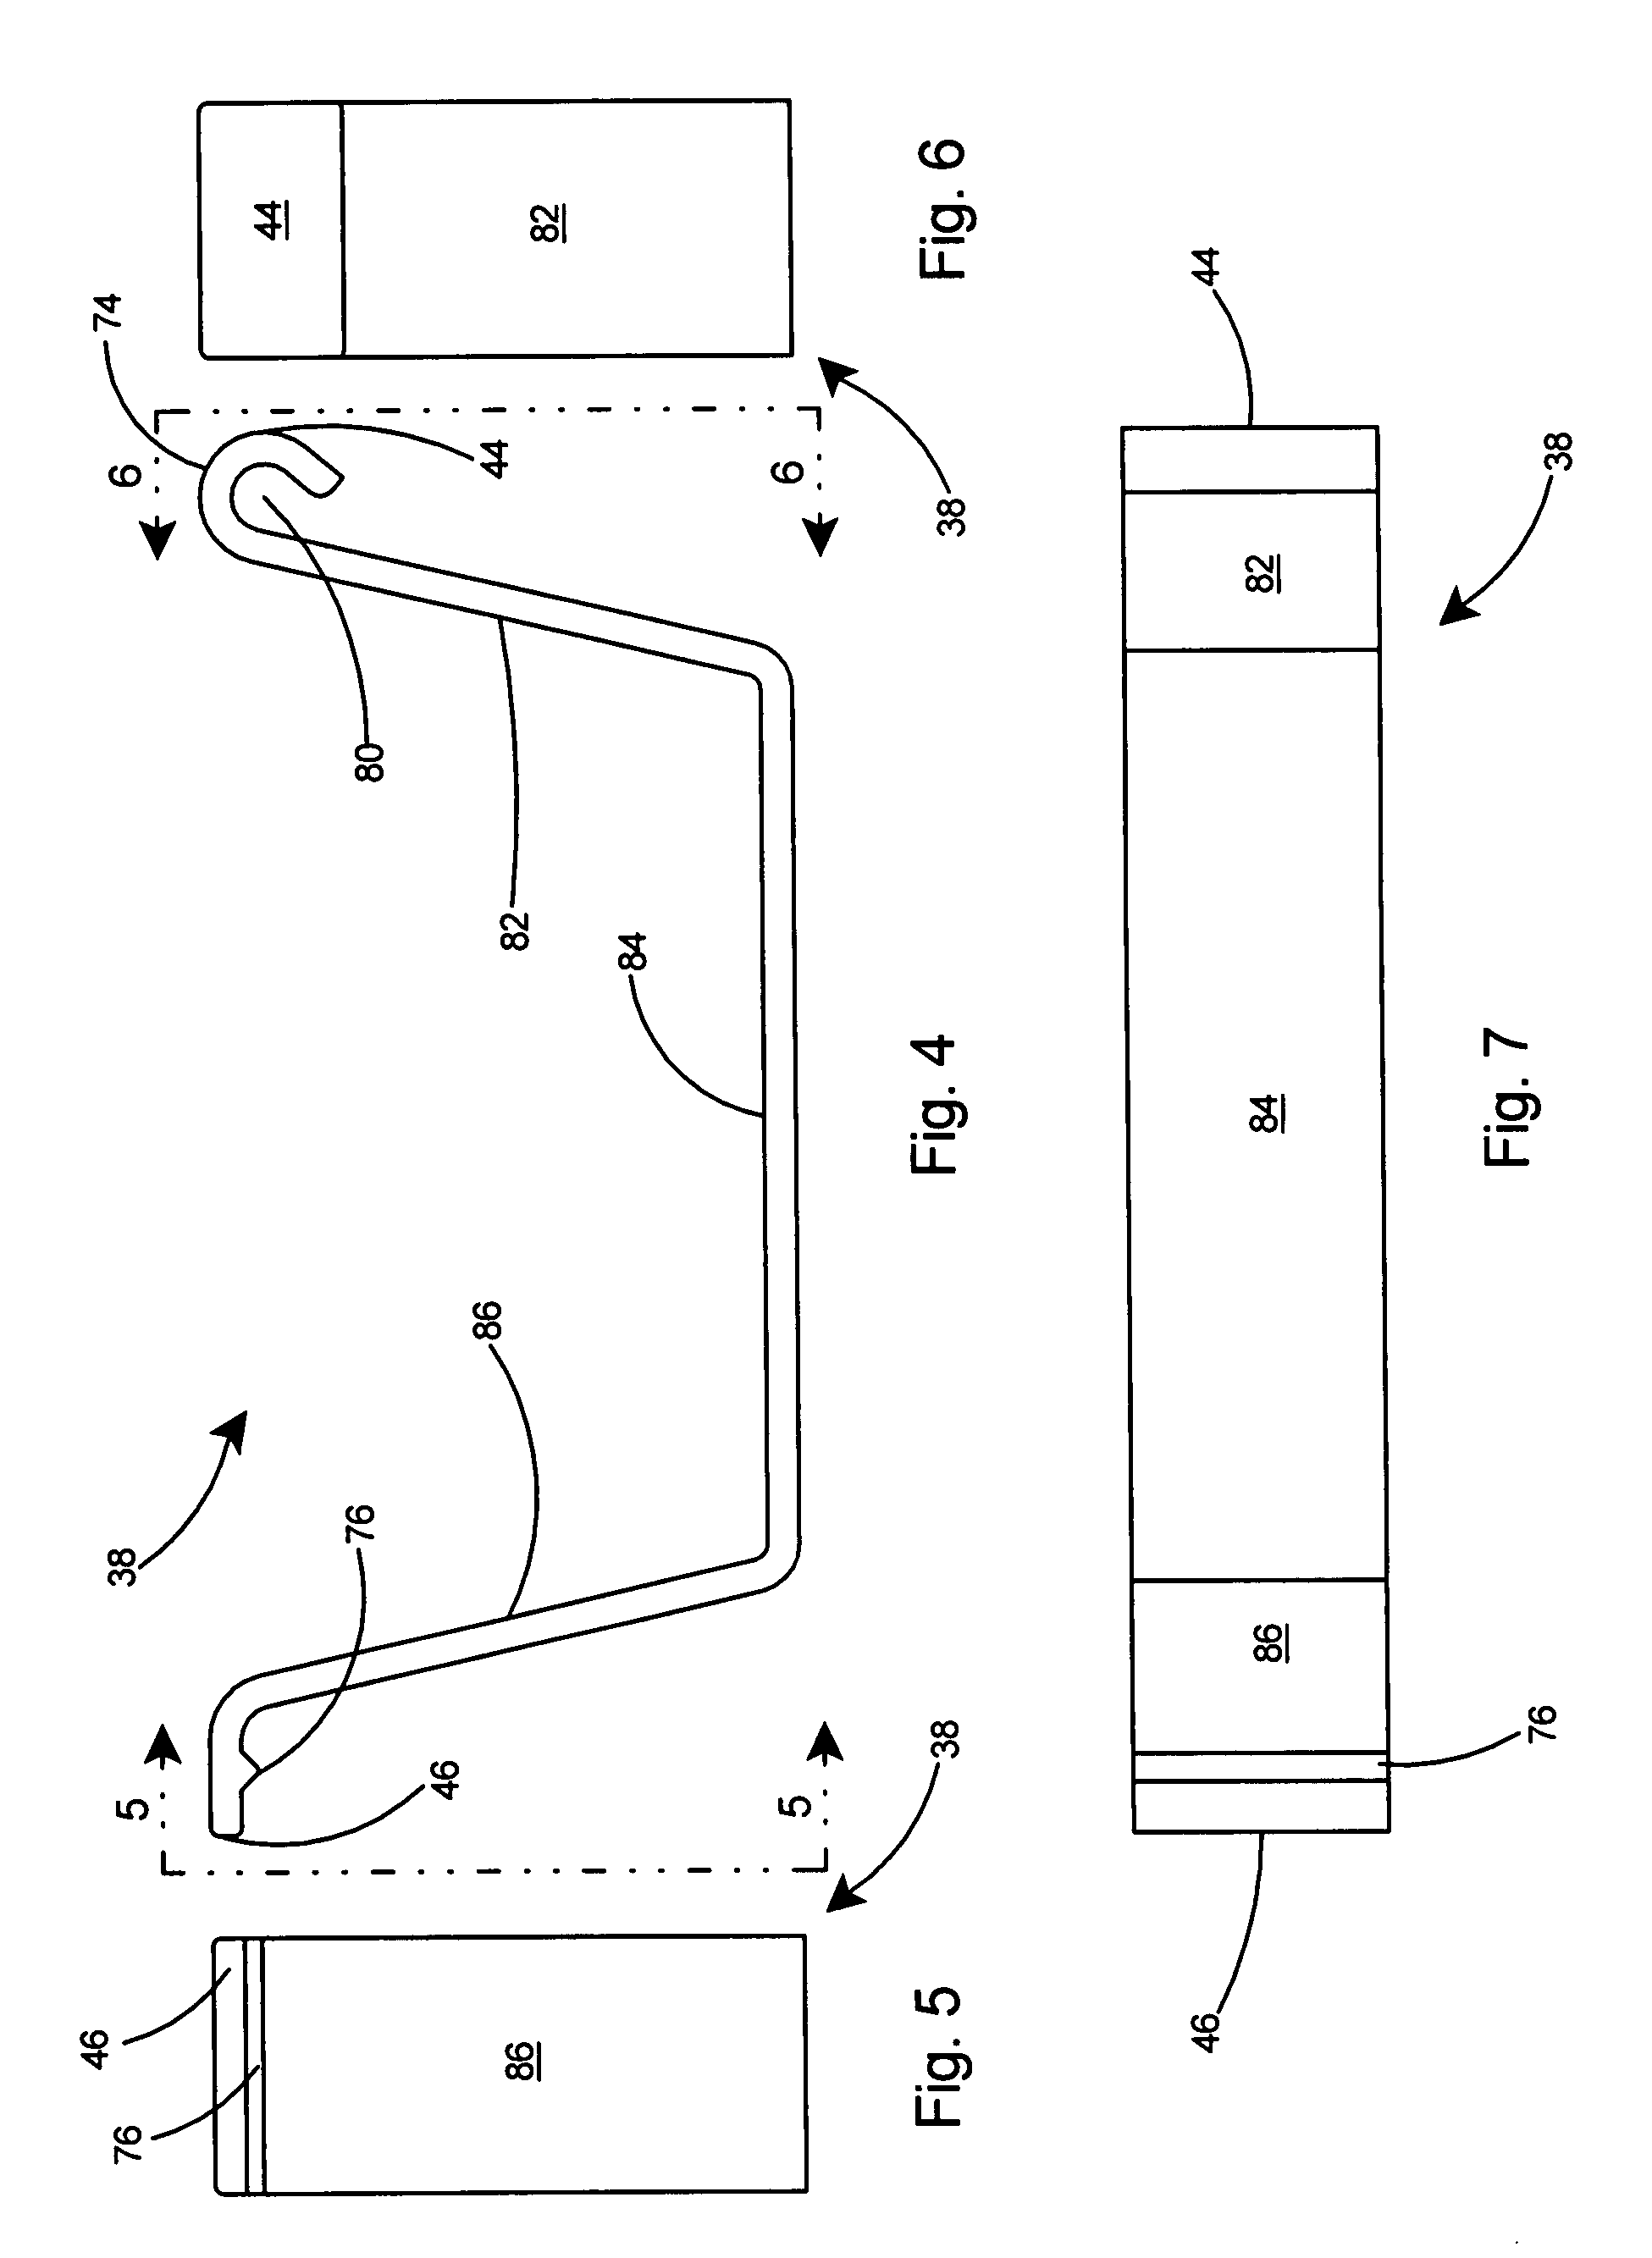 Cable support assembly for minimizing bend radius of cables